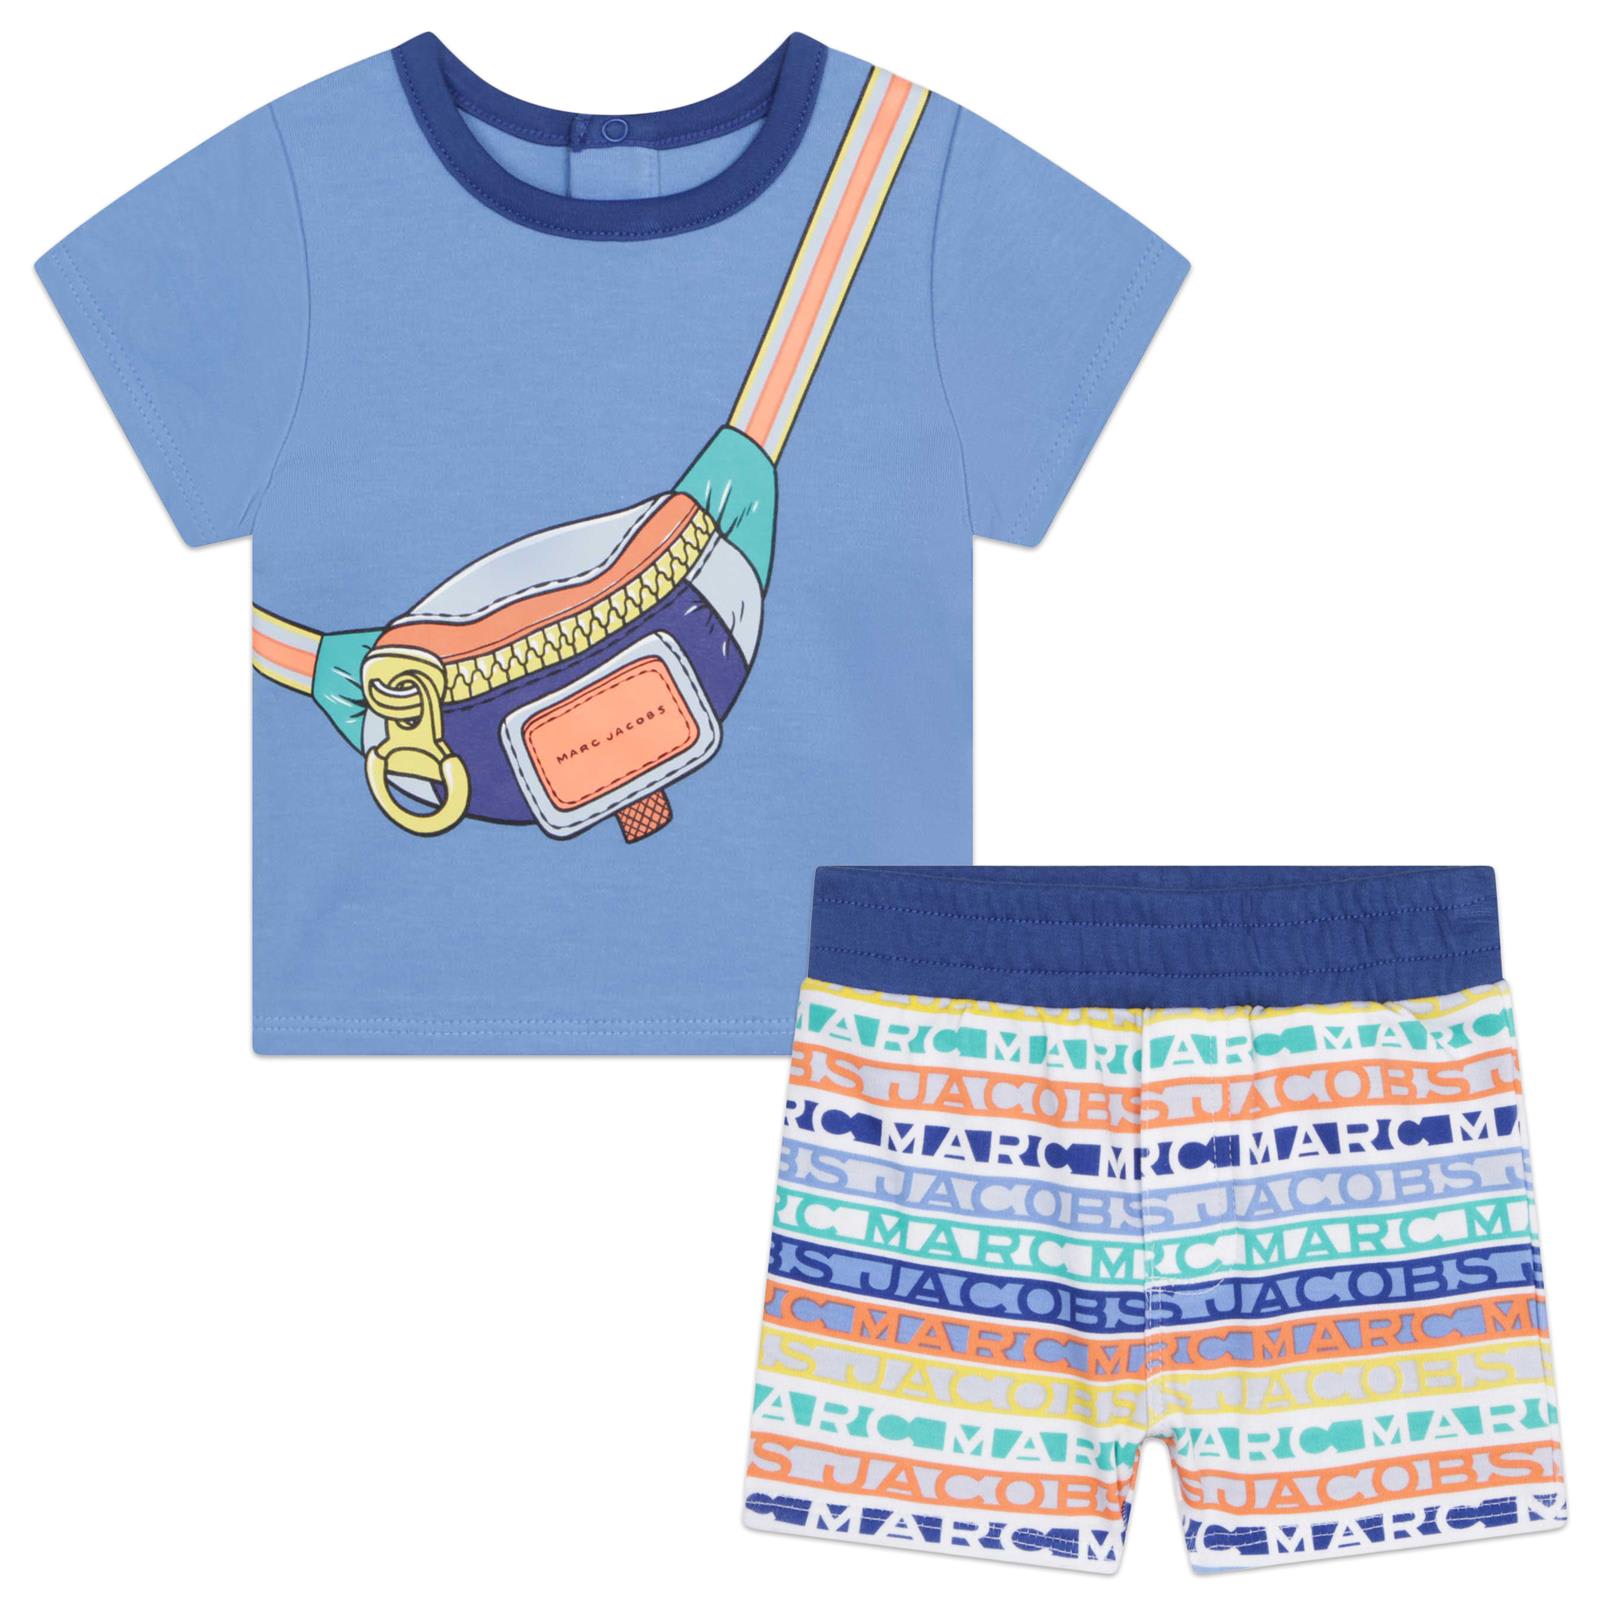 MARC JACOBS PRINTED T-SHIRT AND SHORTS SET